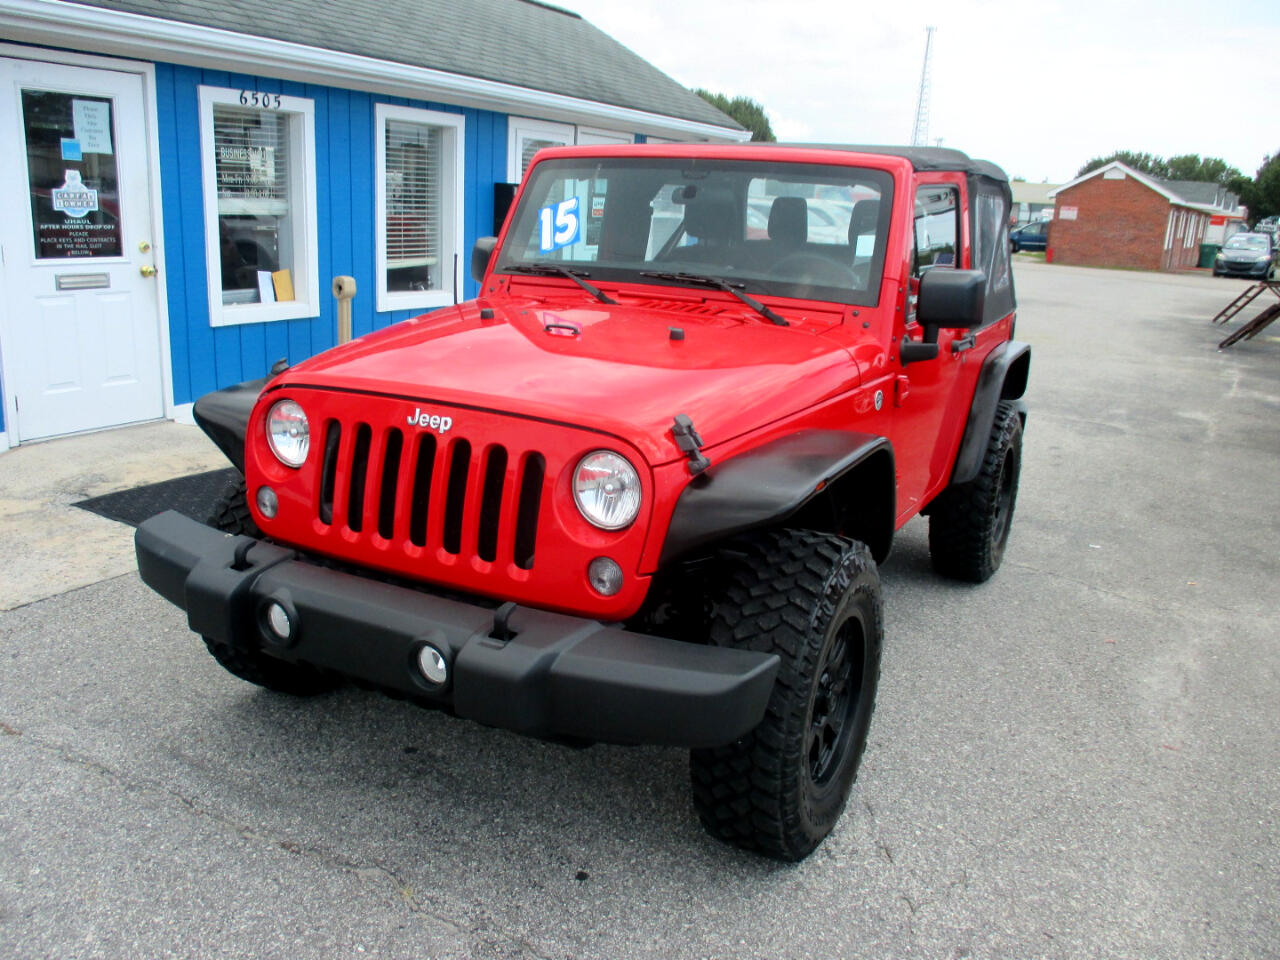 Used 2015 Jeep Wrangler 4WD 2dr Sport for Sale in Wilmington NC 28405  Lloyd's Sales and Storage